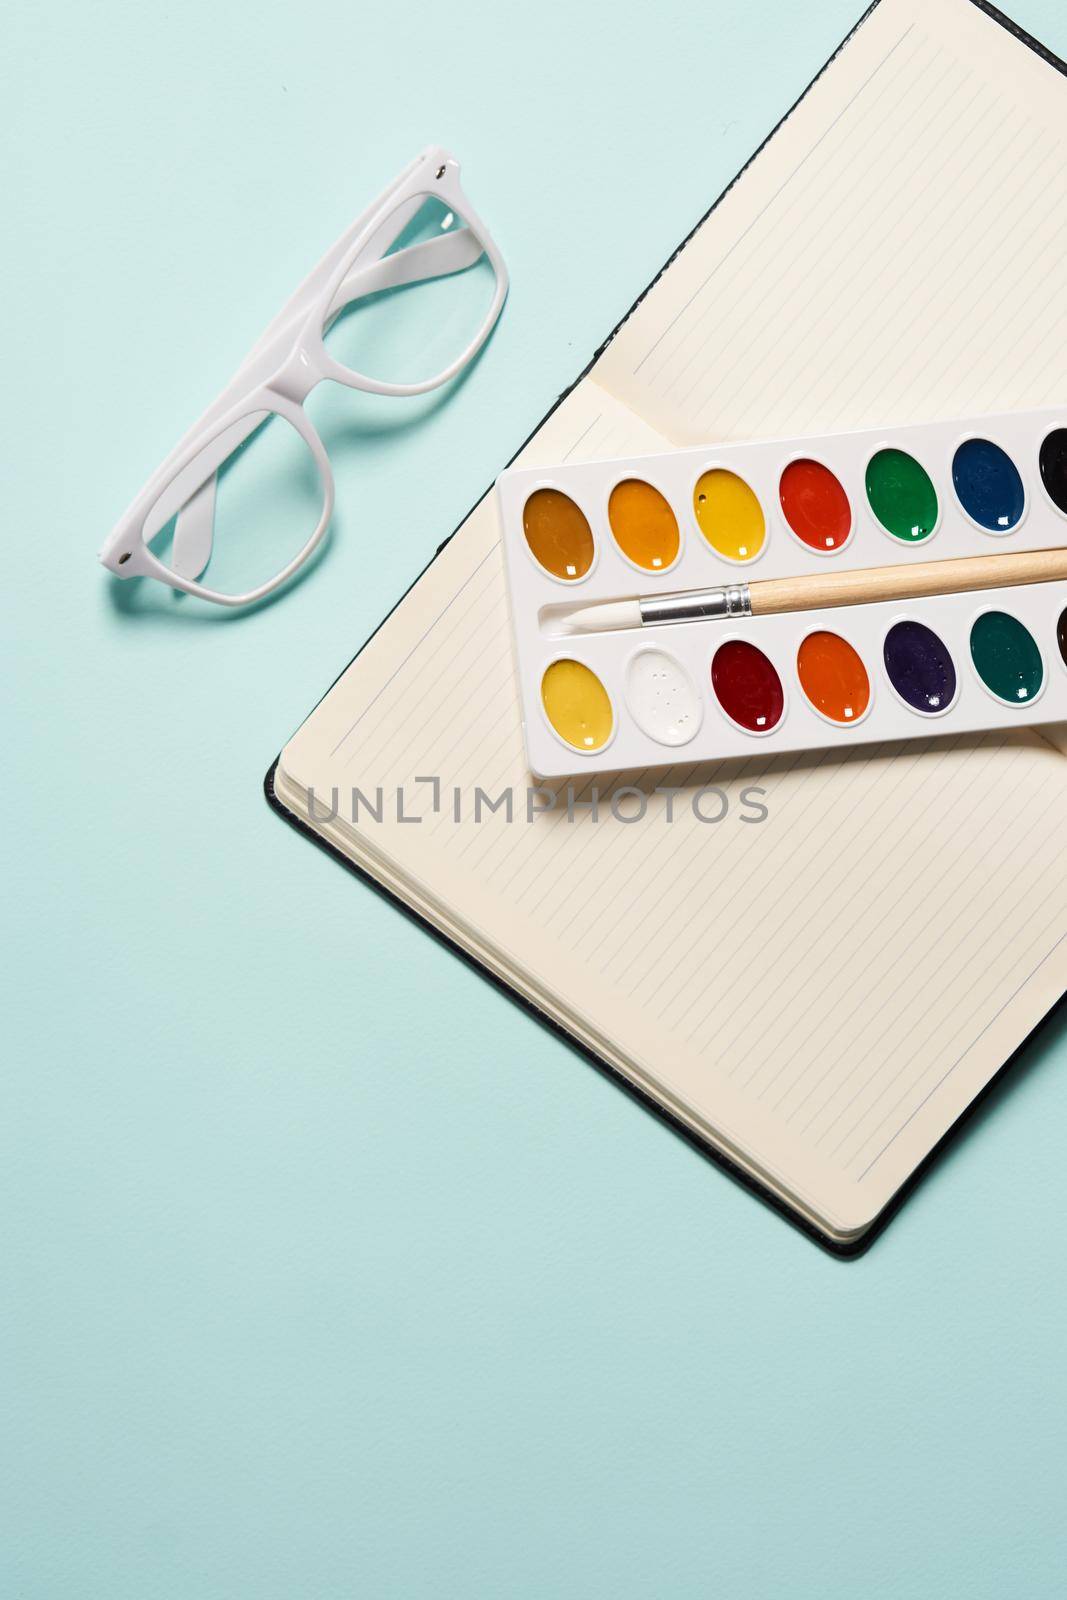 watercolor paint creative drawing object top view. High quality photo